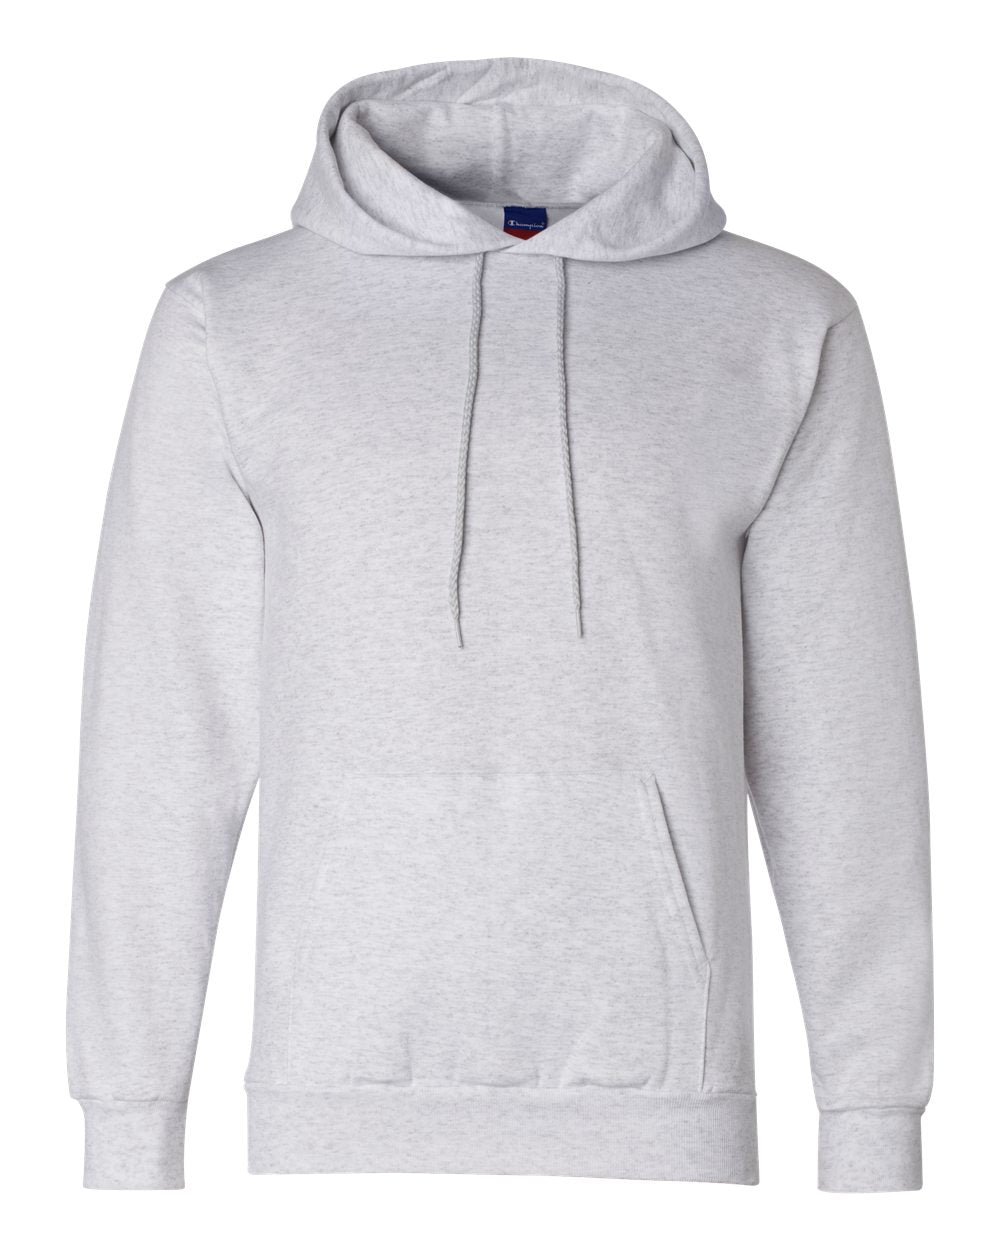 Fraternity Champion Hooded Sweatshirt Greek Clothing and Apparel ...